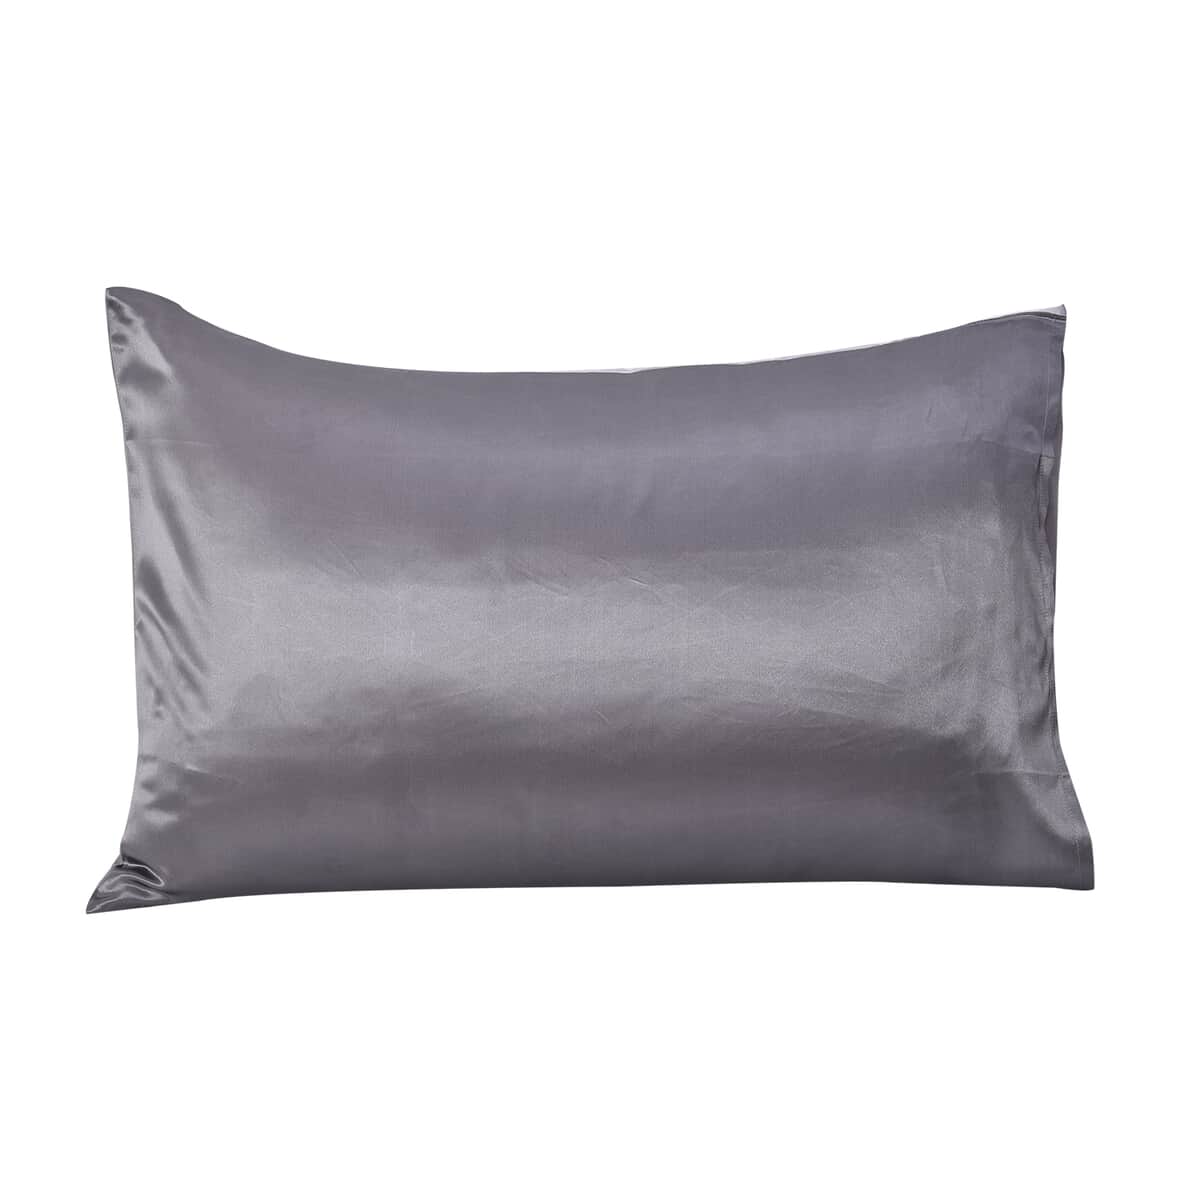 Symphony Home Gray 100% Mulberry Silk Pillowcase Infused with Hyaluronic Acid & Argan Oil - King, Pillow Protectors, Pillow Cover, Cushion Cover, Pillow Shams, Pillow Case Covers image number 2